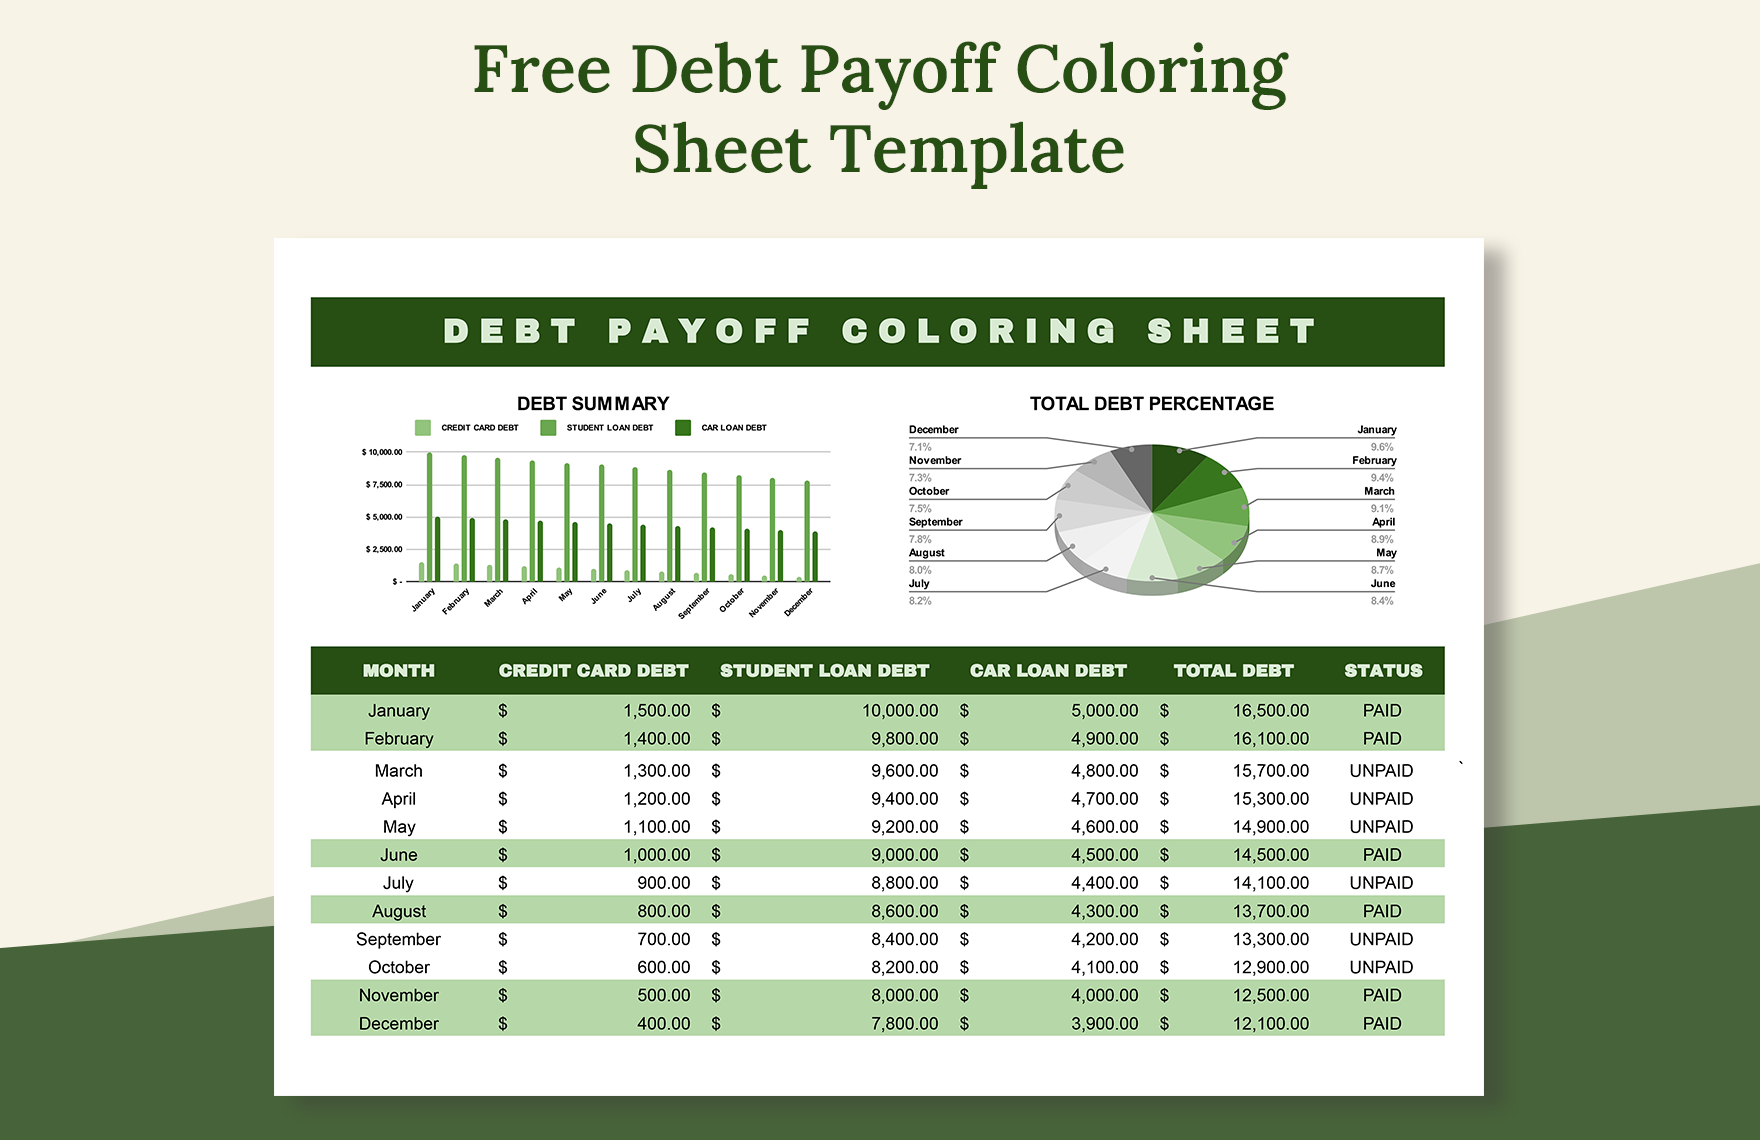 Debt Payoff Coloring Sheet Template